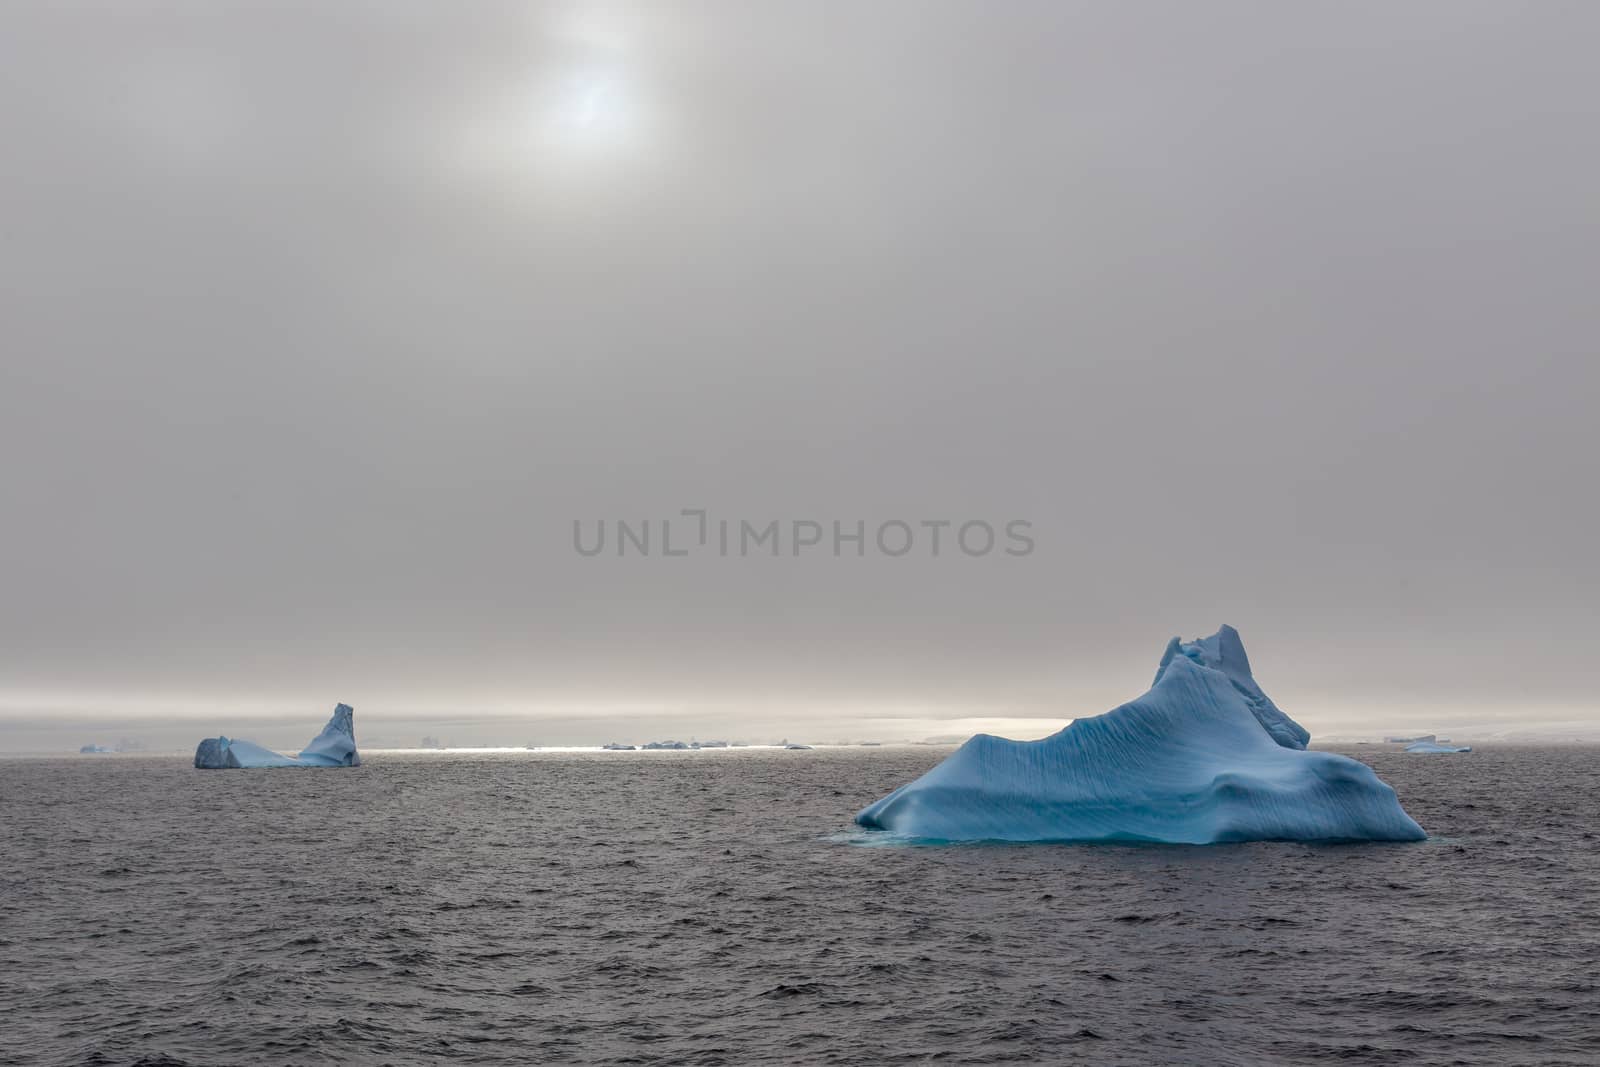 Iceberg drifting at Lemaire Channel, Antarctica by ambeon